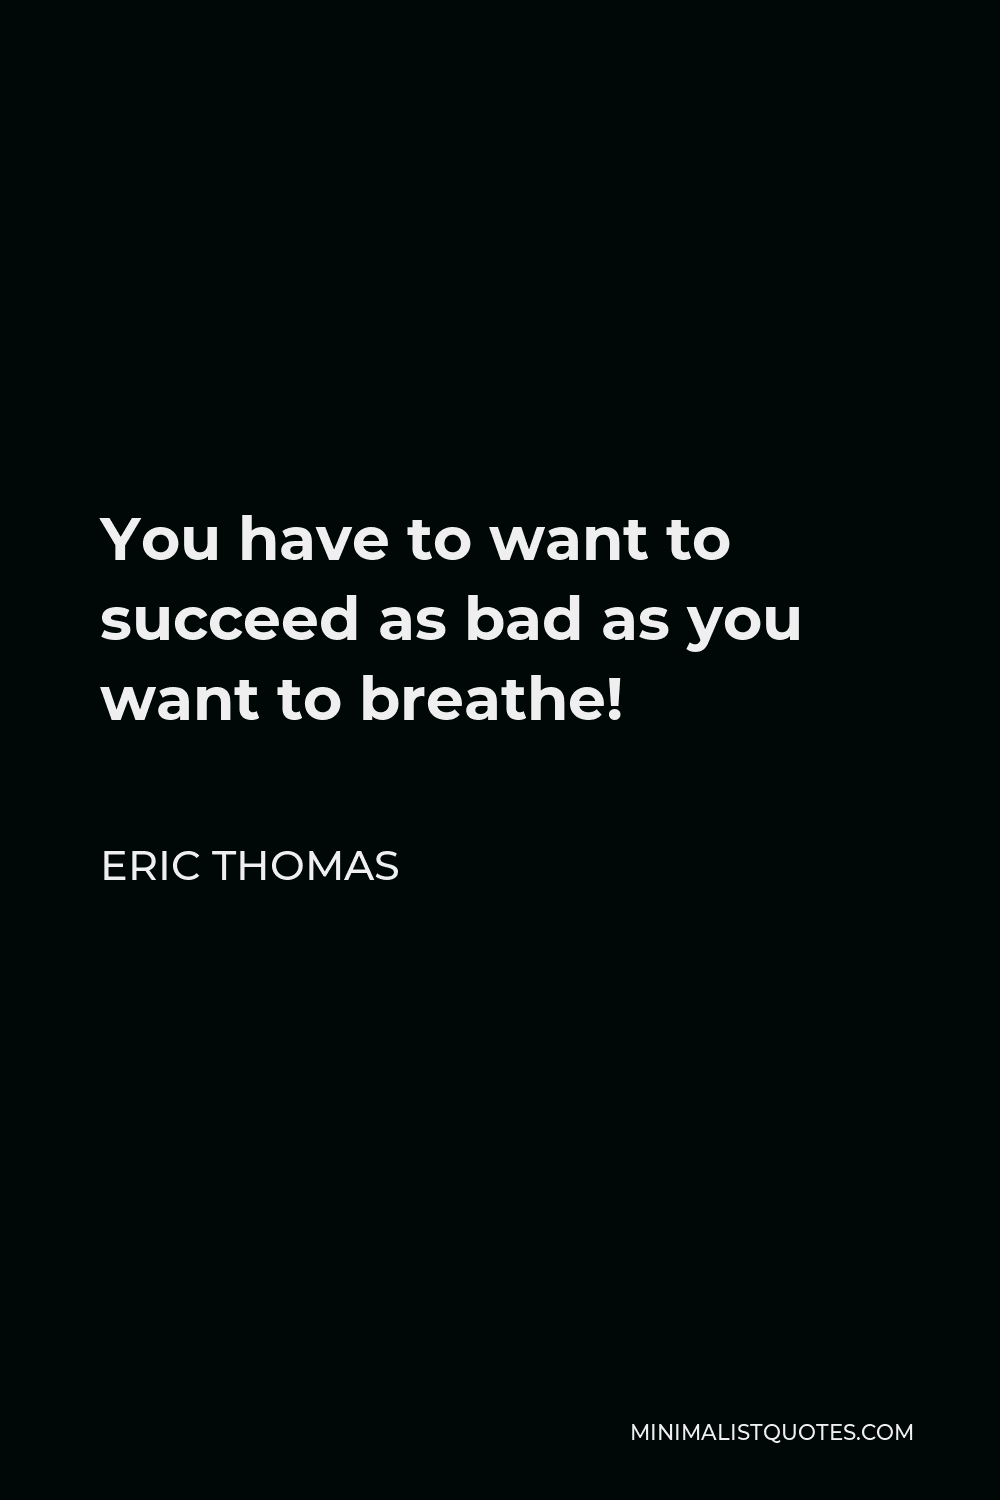 Eric Thomas Quote - You have to want to succeed as bad as you want to breathe!